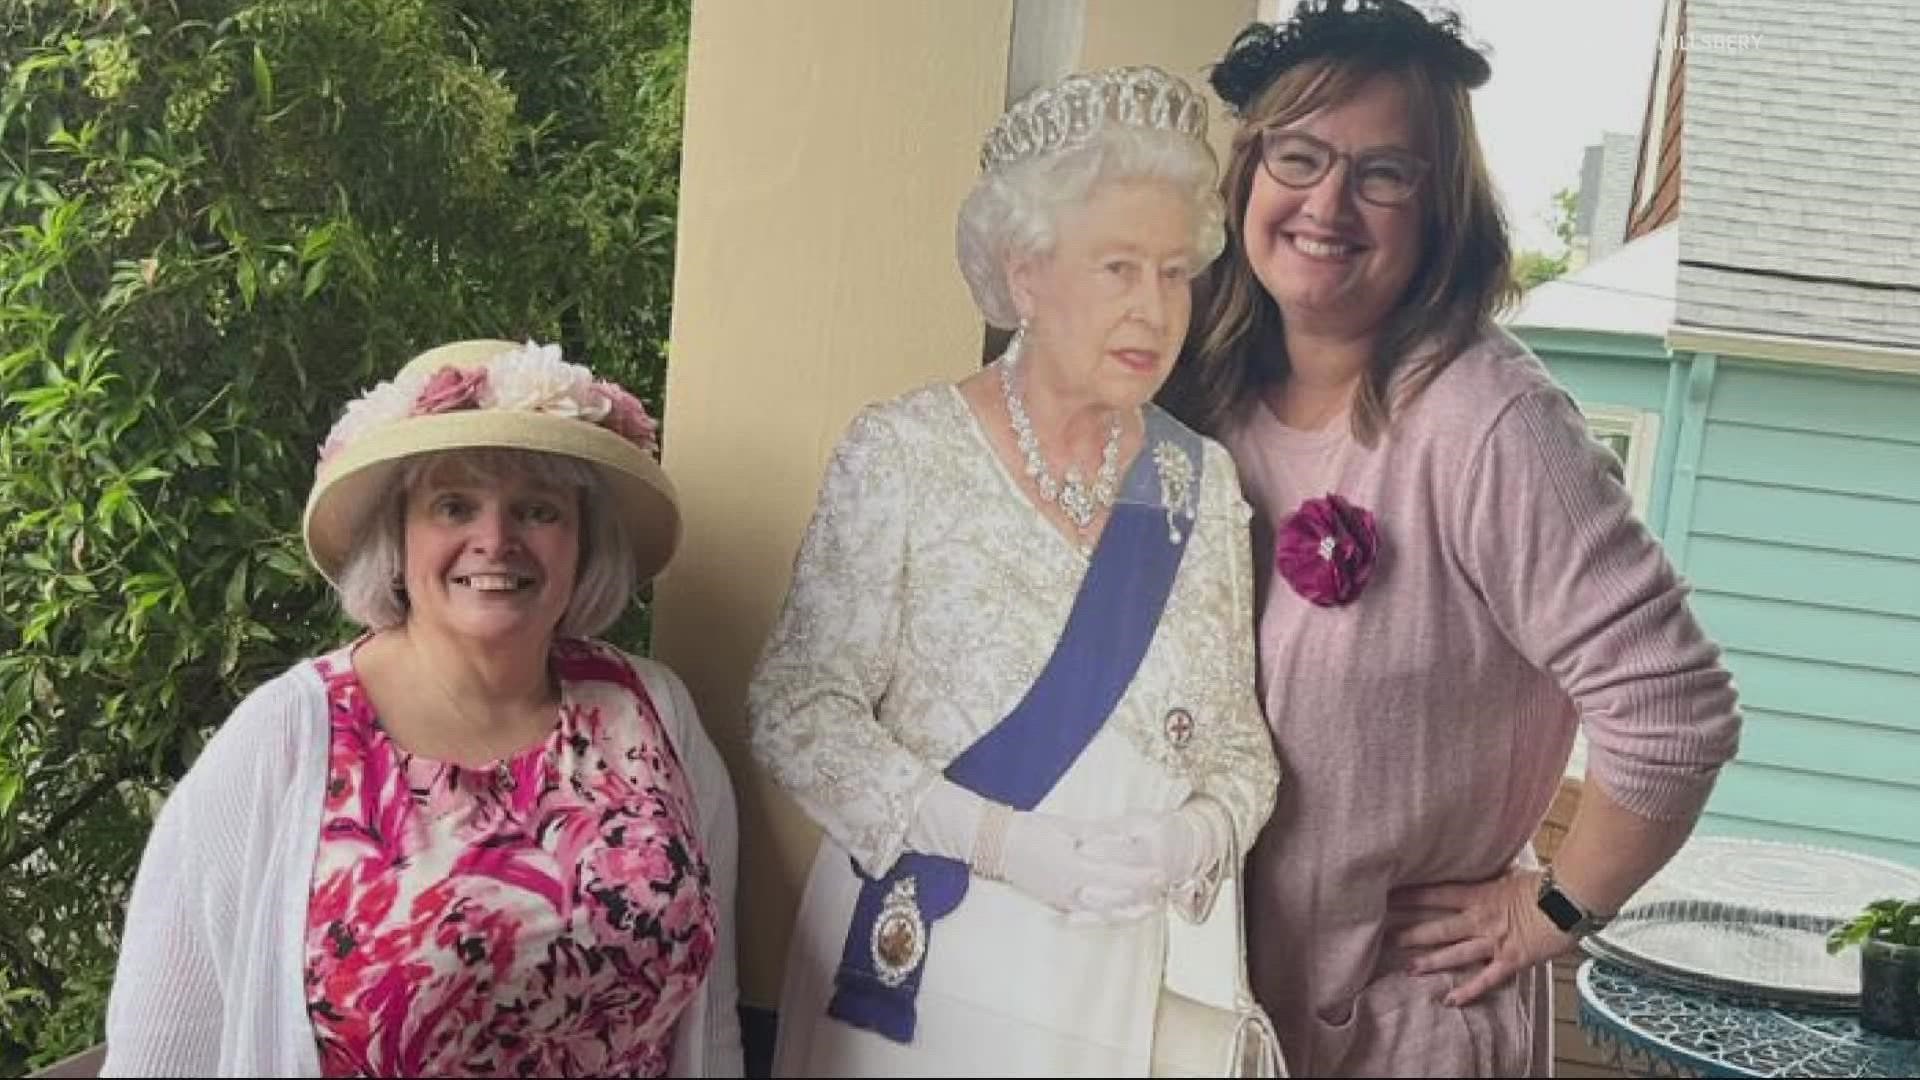 Over the years Irene Silver and Jacque Hillsbery celebrated major milestones for the Royal Family, sharing a particular love for Queen Elizabeth II.